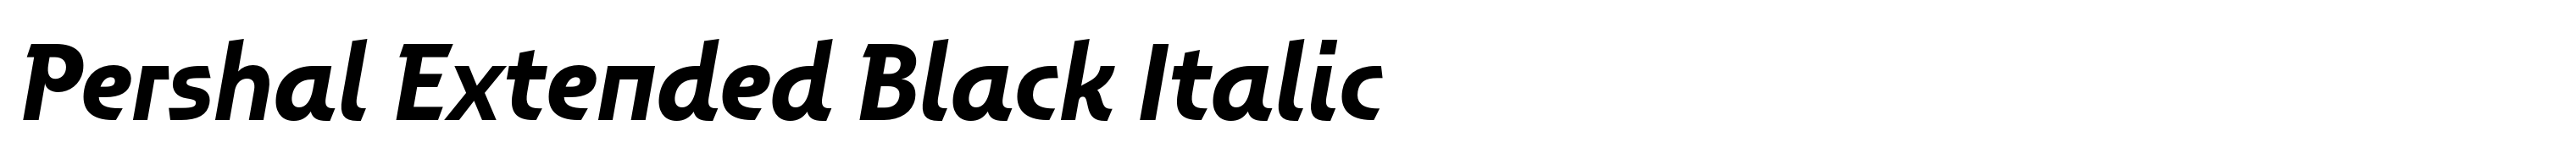 Pershal Extended Black Italic